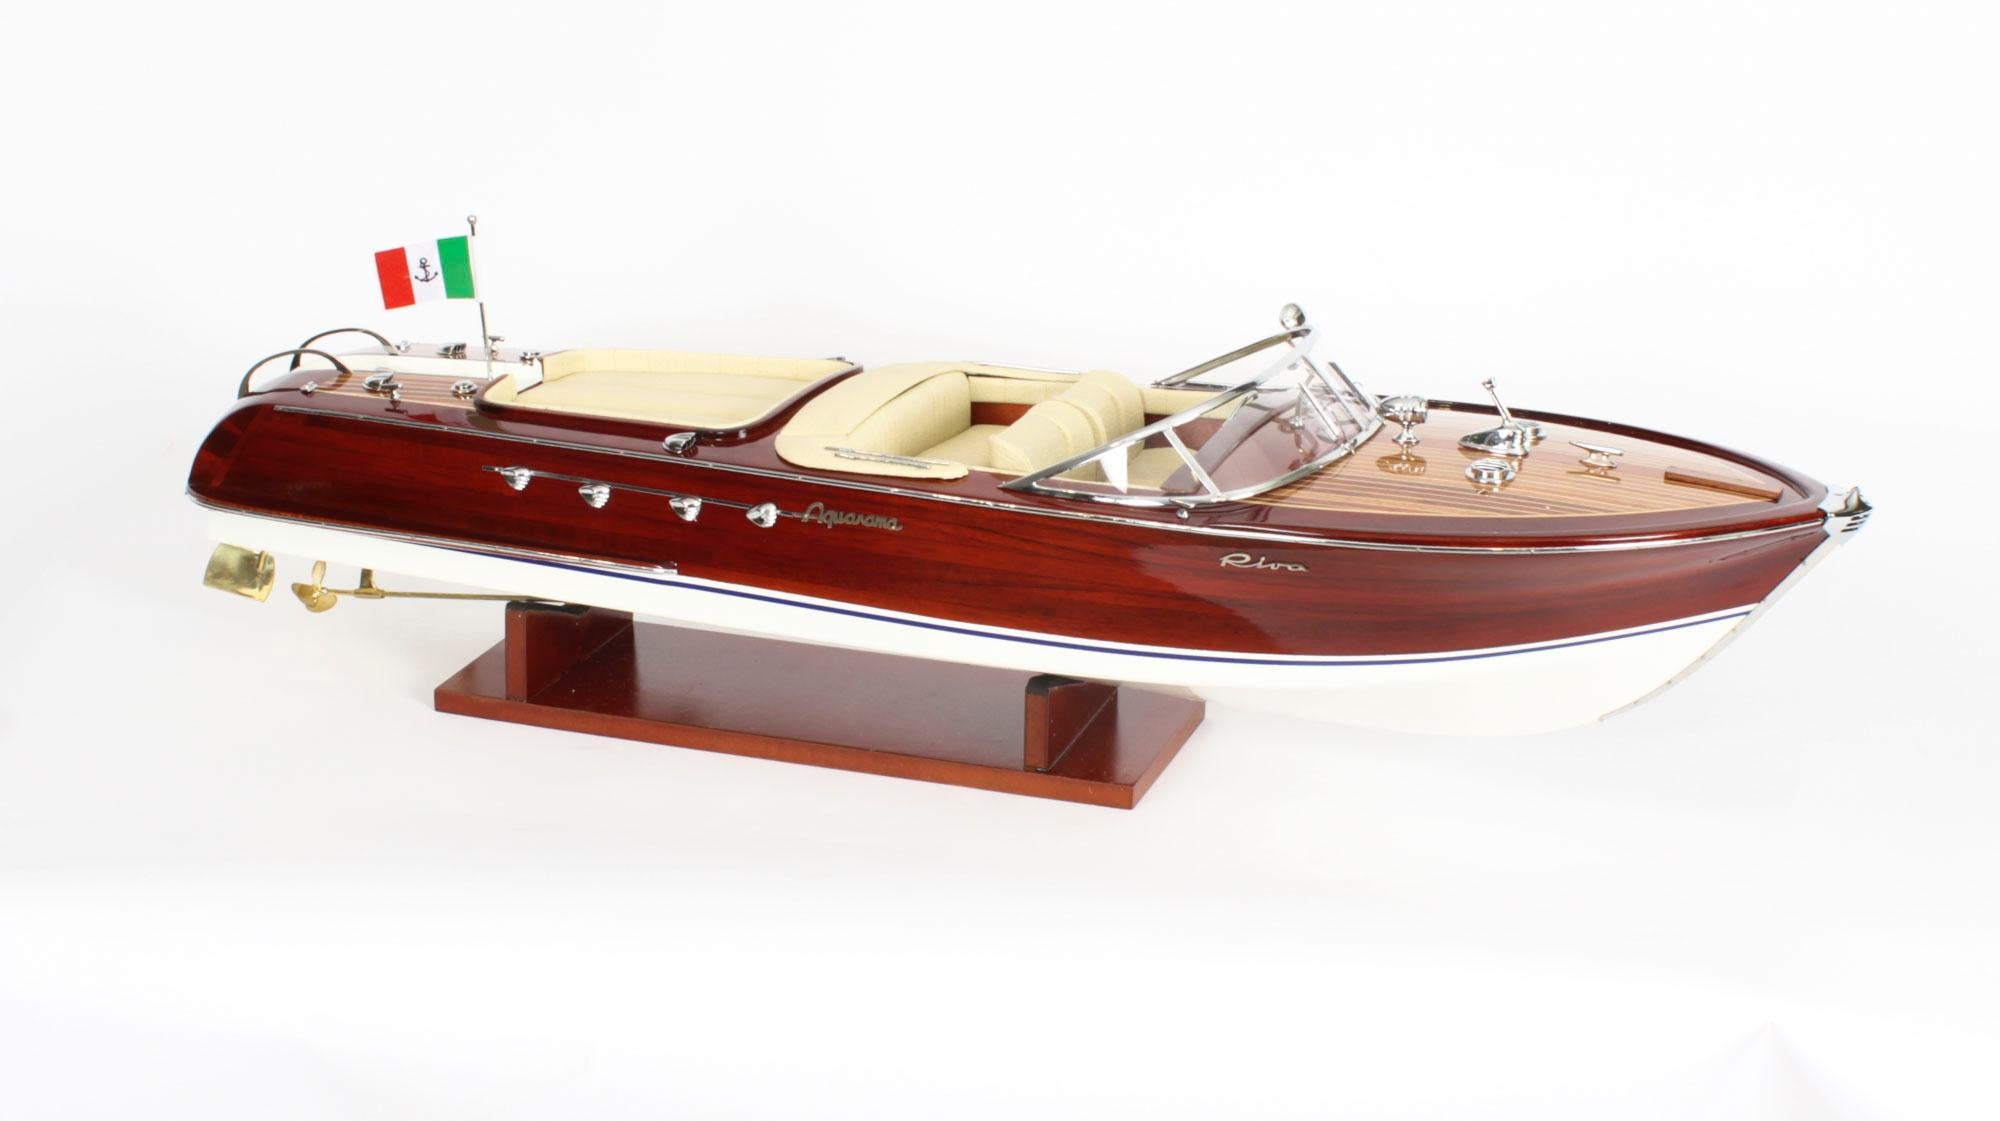 Vintage model of a Riva Aquarama Speedboat 3ft with Cream Interior 20th C For Sale 12